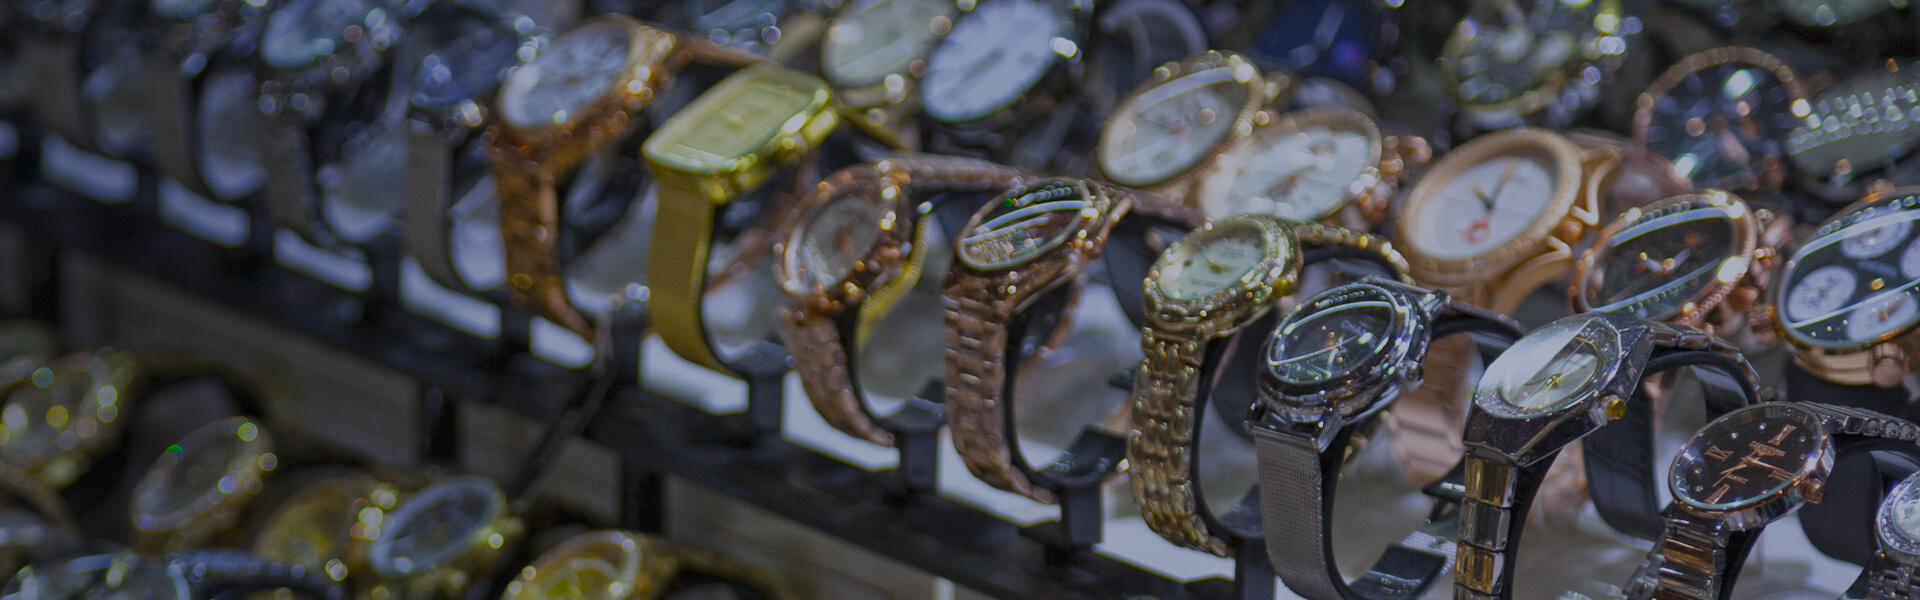 Image of watches displayed in a shop window